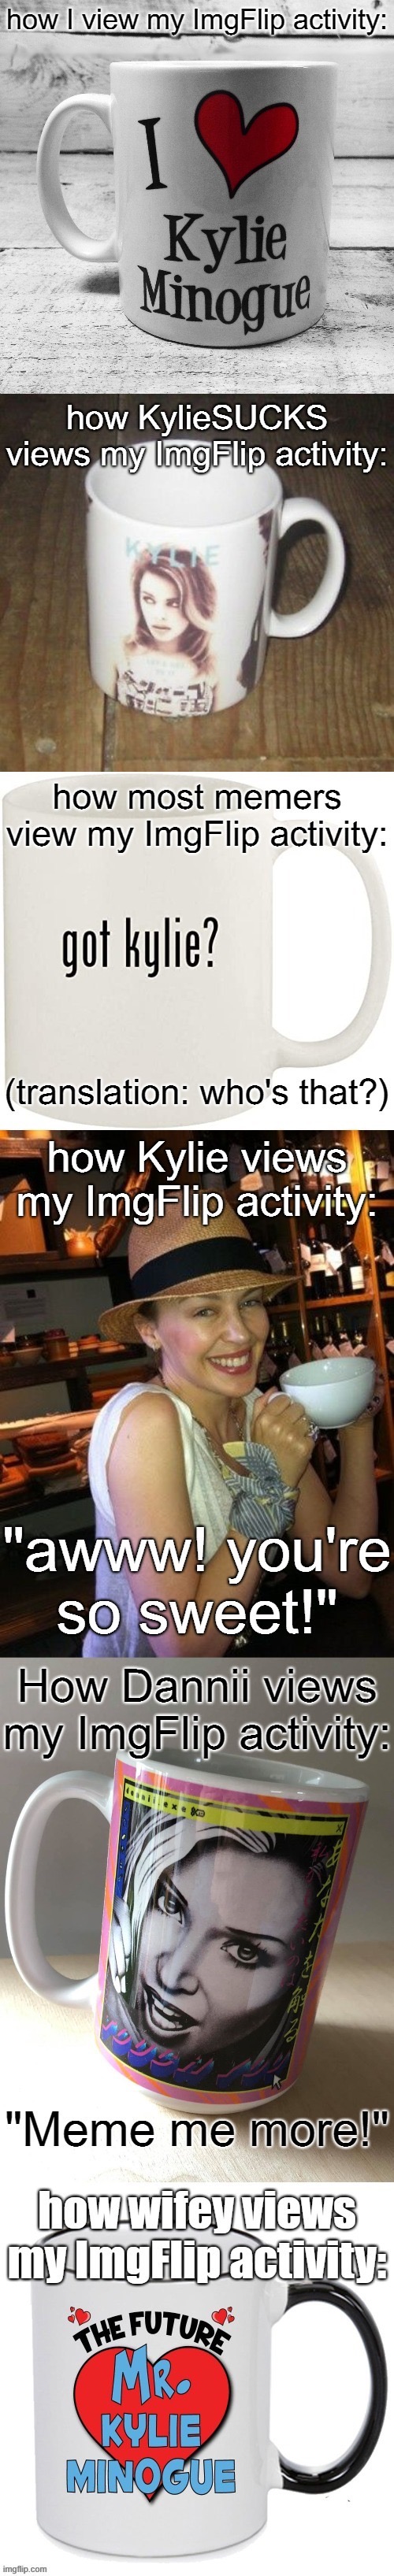 A caffeinated tour of Kamikaze lore. | image tagged in coffee,imgflipper,imgflip user,imgflip humor,memes about memes,memes about memeing | made w/ Imgflip meme maker